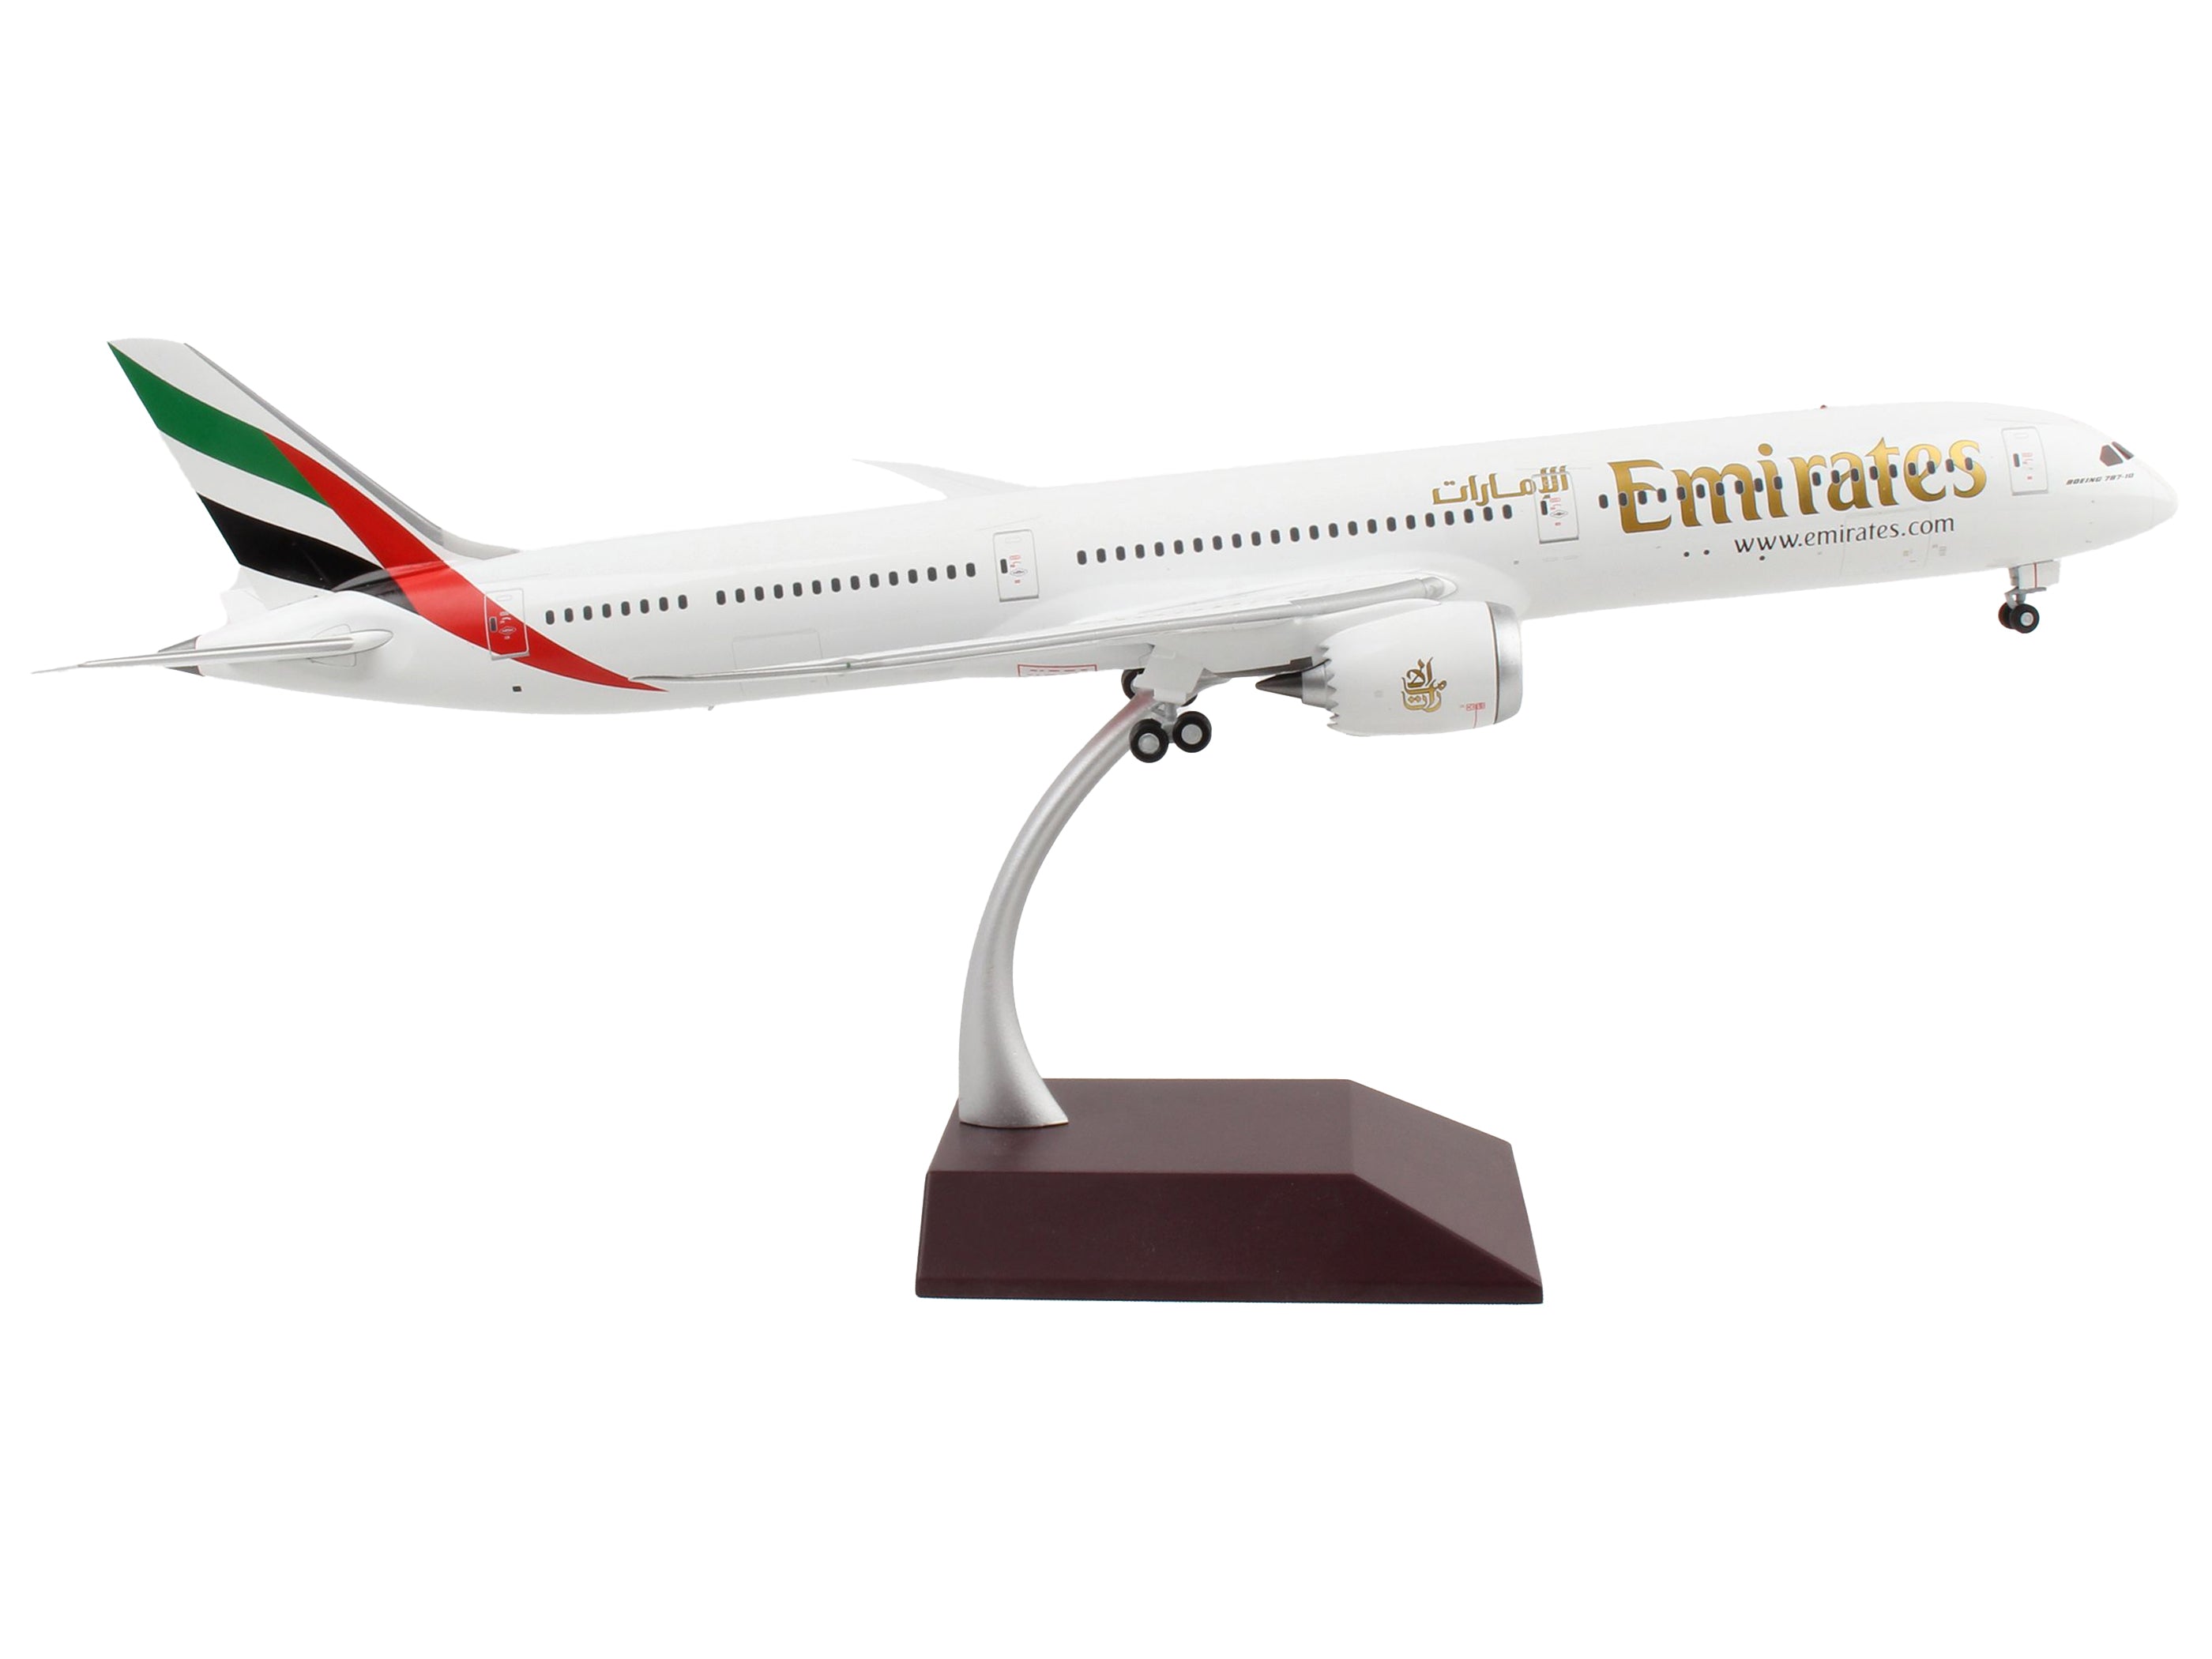 Boeing 787-10 Commercial Aircraft "Emirates Airlines" White with Striped Tail "Gemini 200" Series 1/200 Diecast Model Airplane by GeminiJets